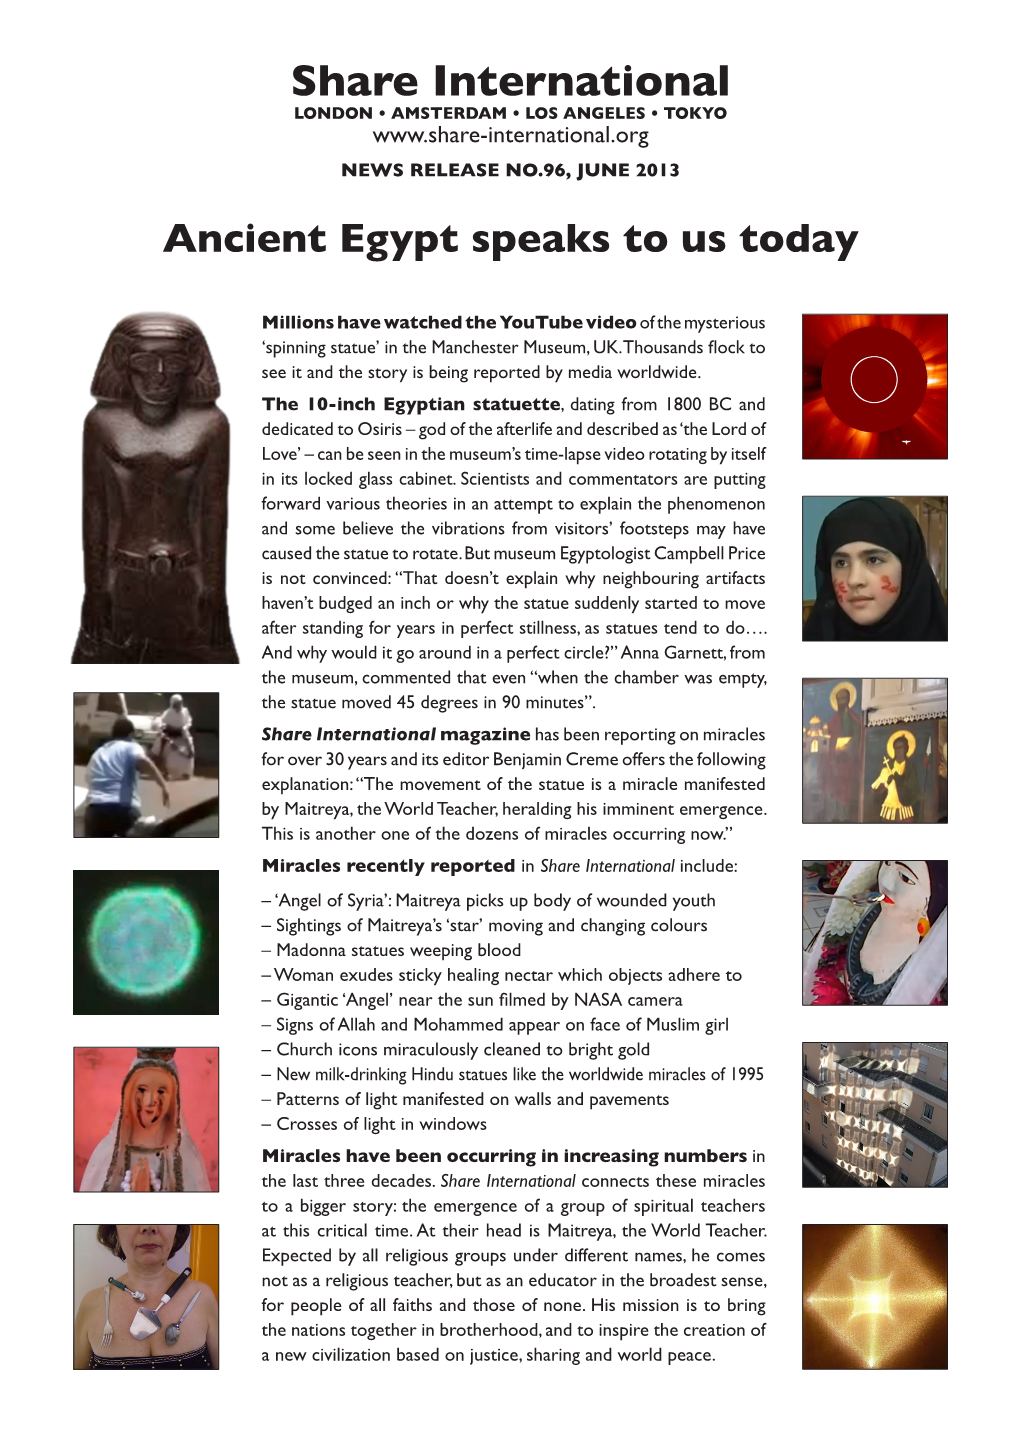 Ancient Egypt Speaks to Us Today